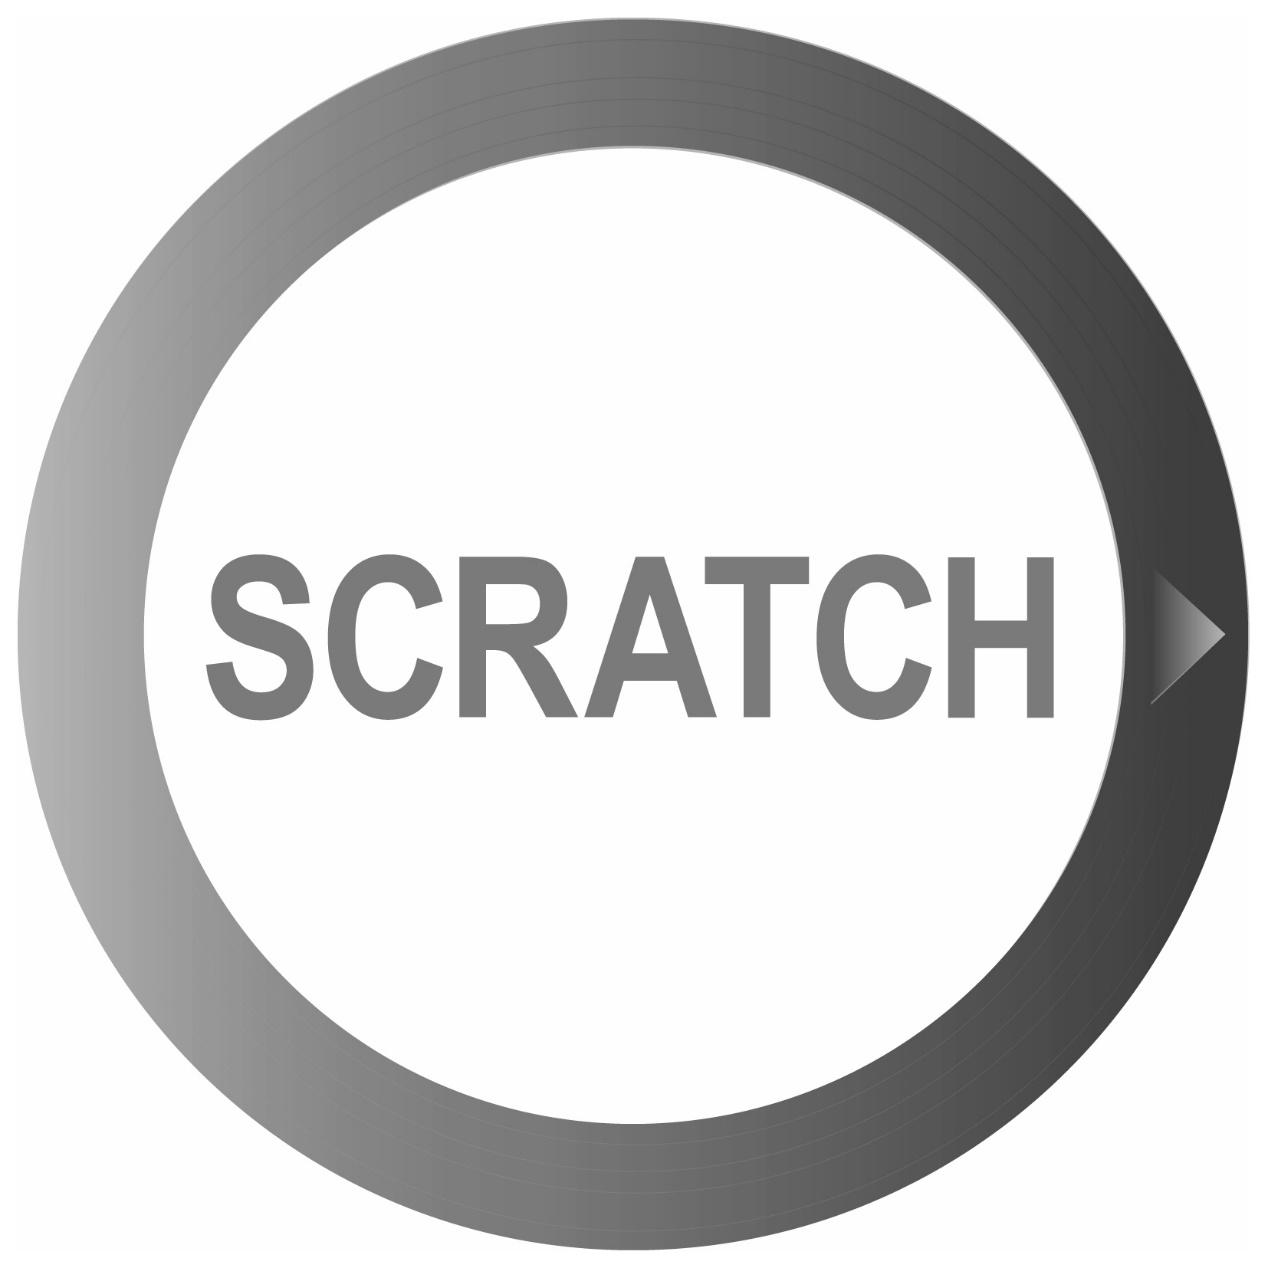 ASSIMILATE Announces SCRATCH 8.6 With Major Updates To Entire Product Line  | SHOOTonline